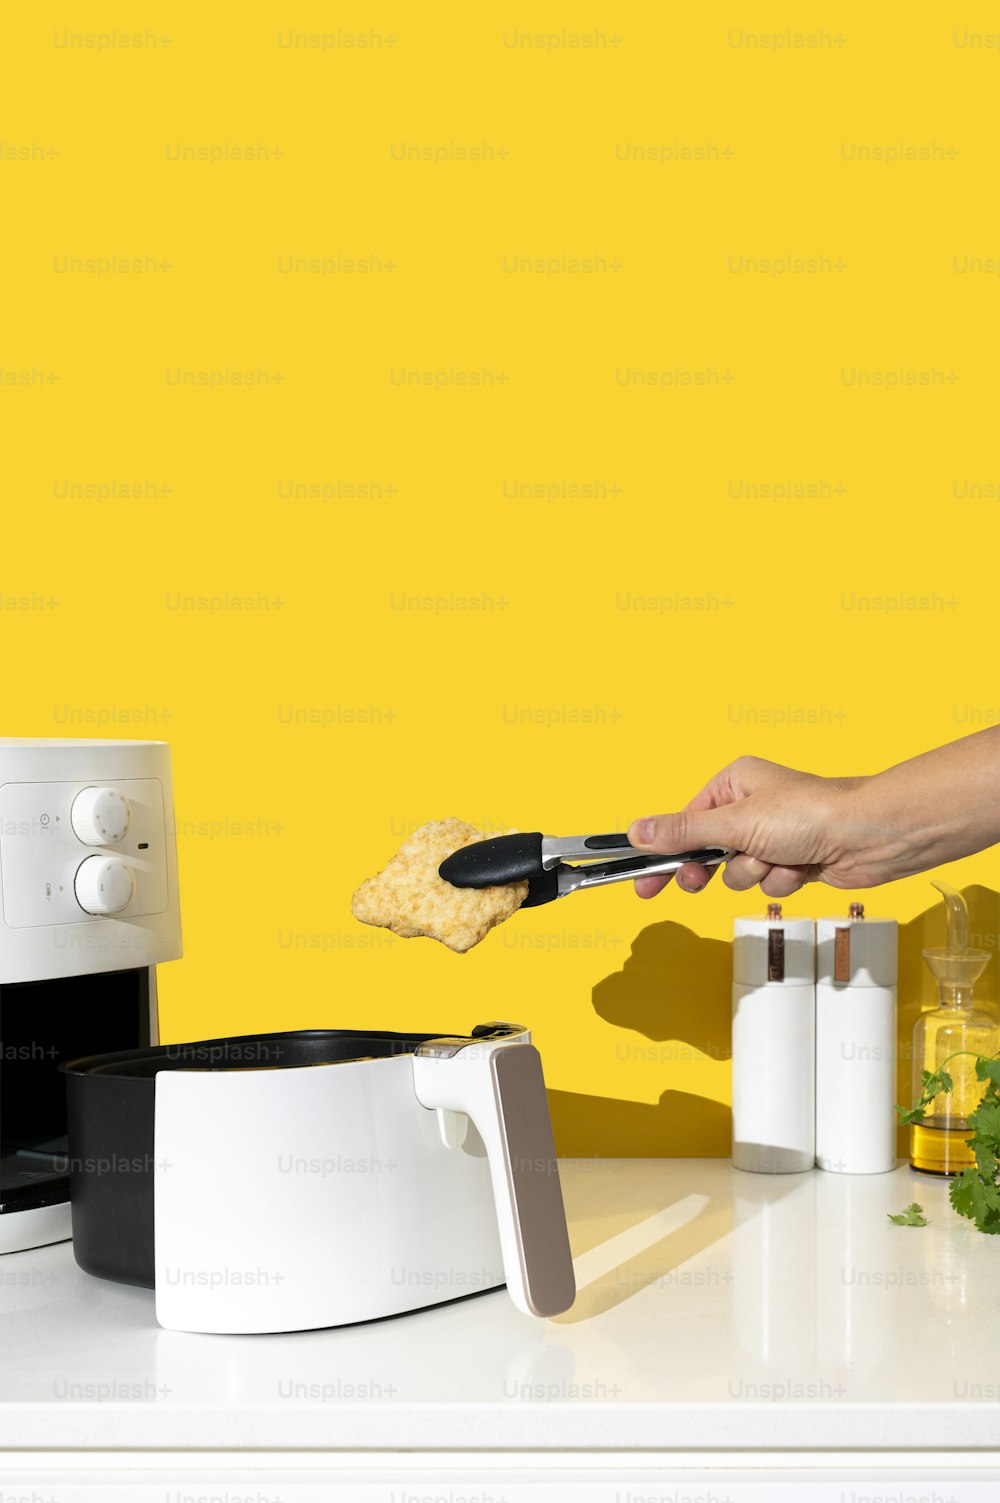 a person is using a toaster on a counter